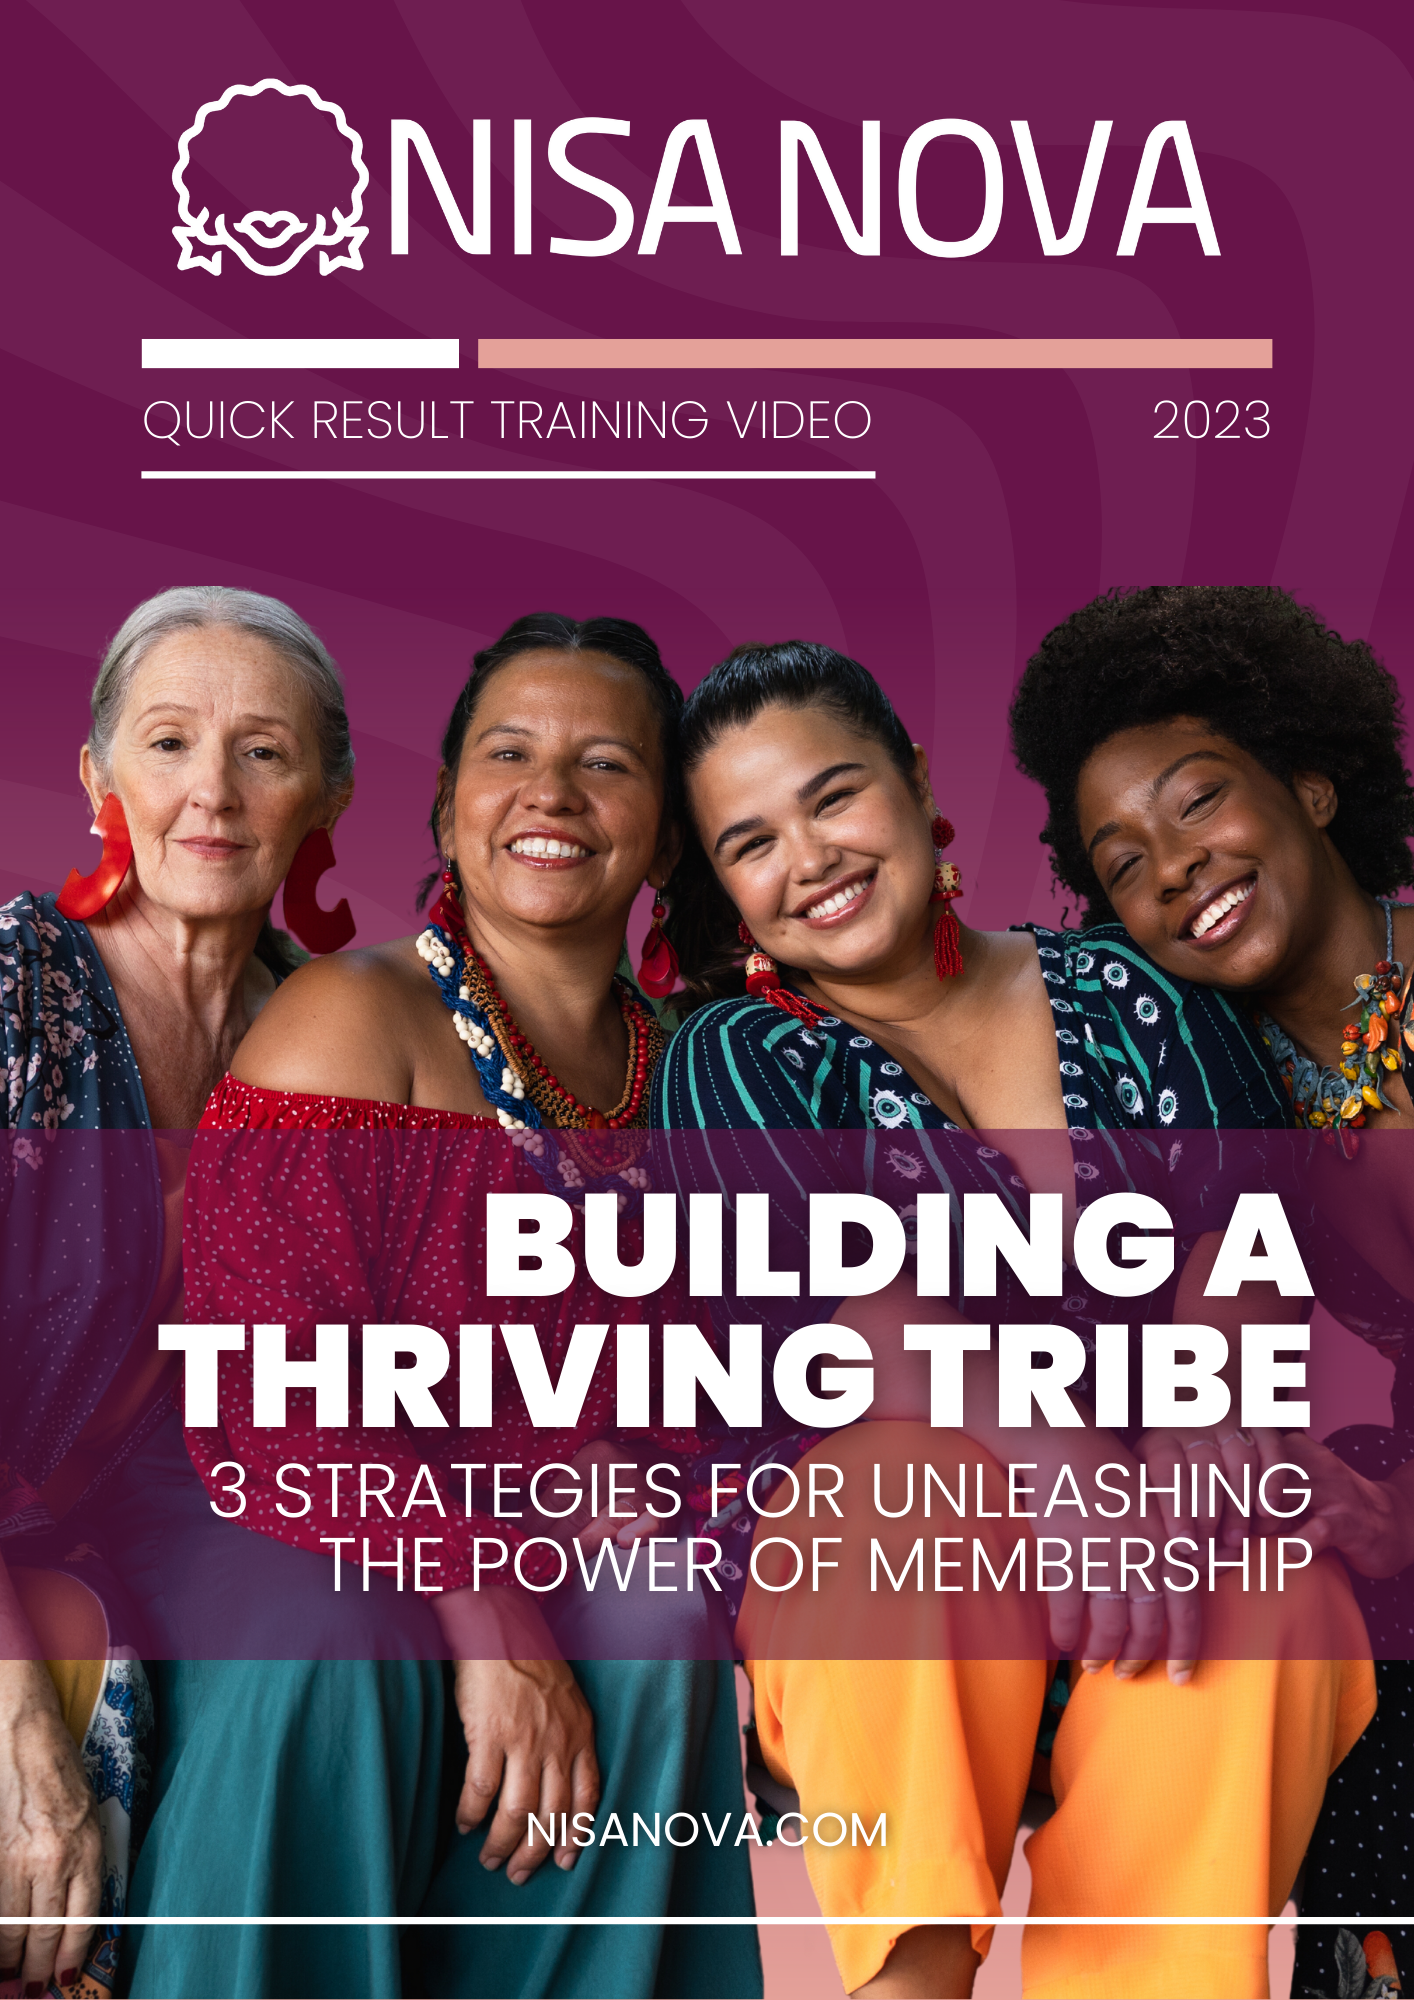 Building a Thriving Tribe: 3 Strategies for Unleashing the Power of Membership